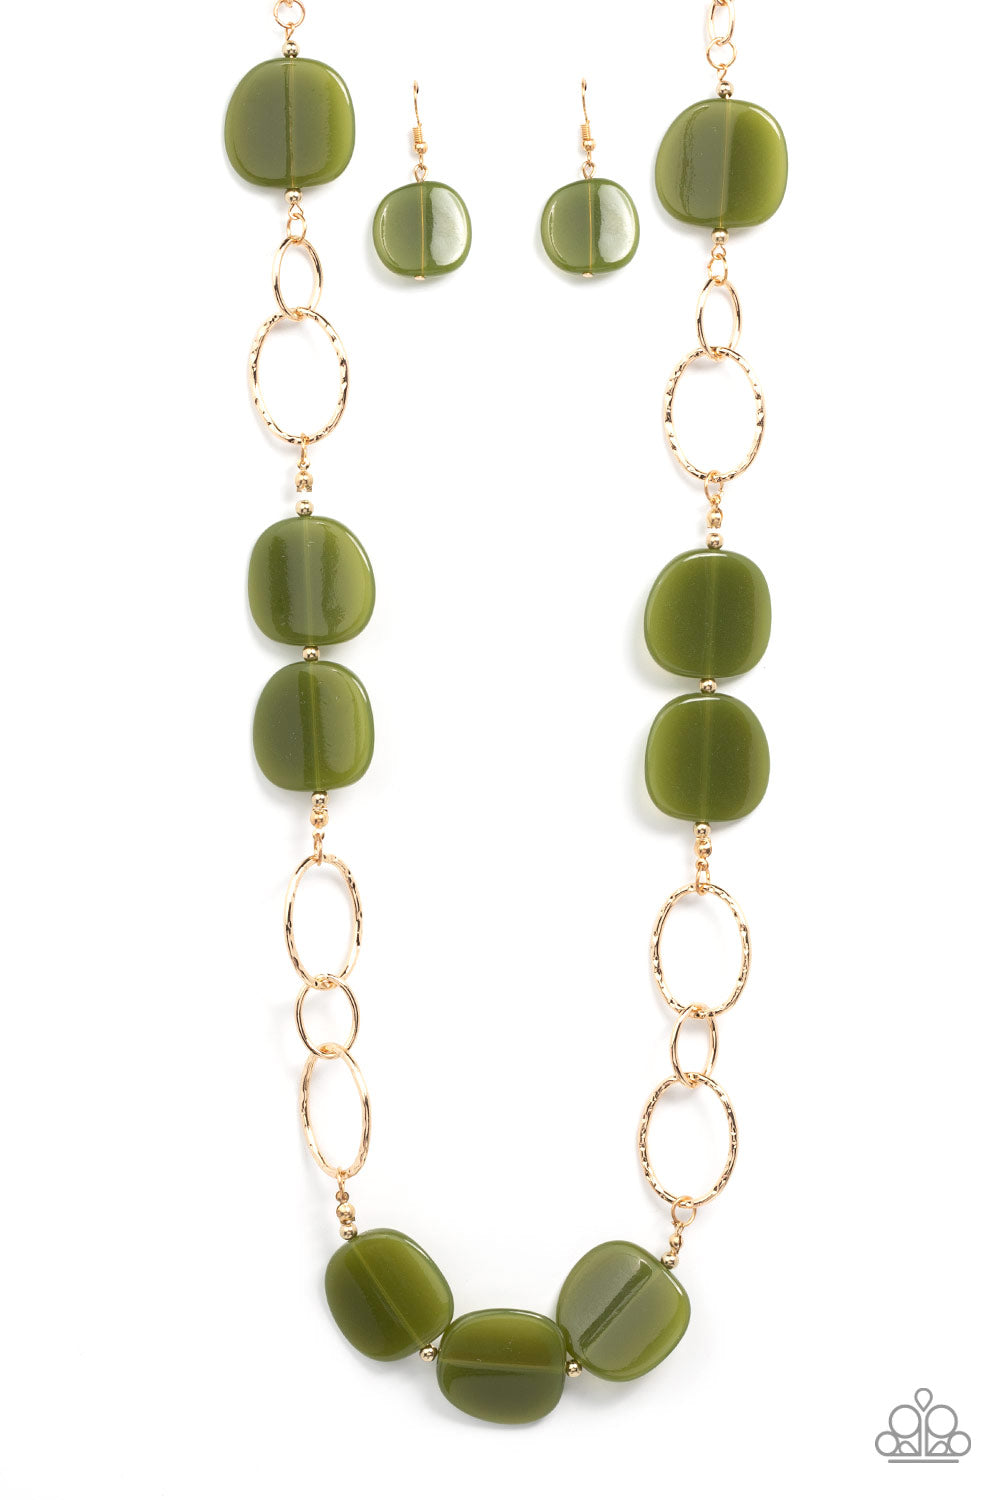 An oversized collection of Olive Branch acrylic accents adorn sections of oversized textured gold links, resulting in a refined pop of color across the chest. Features an adjustable clasp closure.